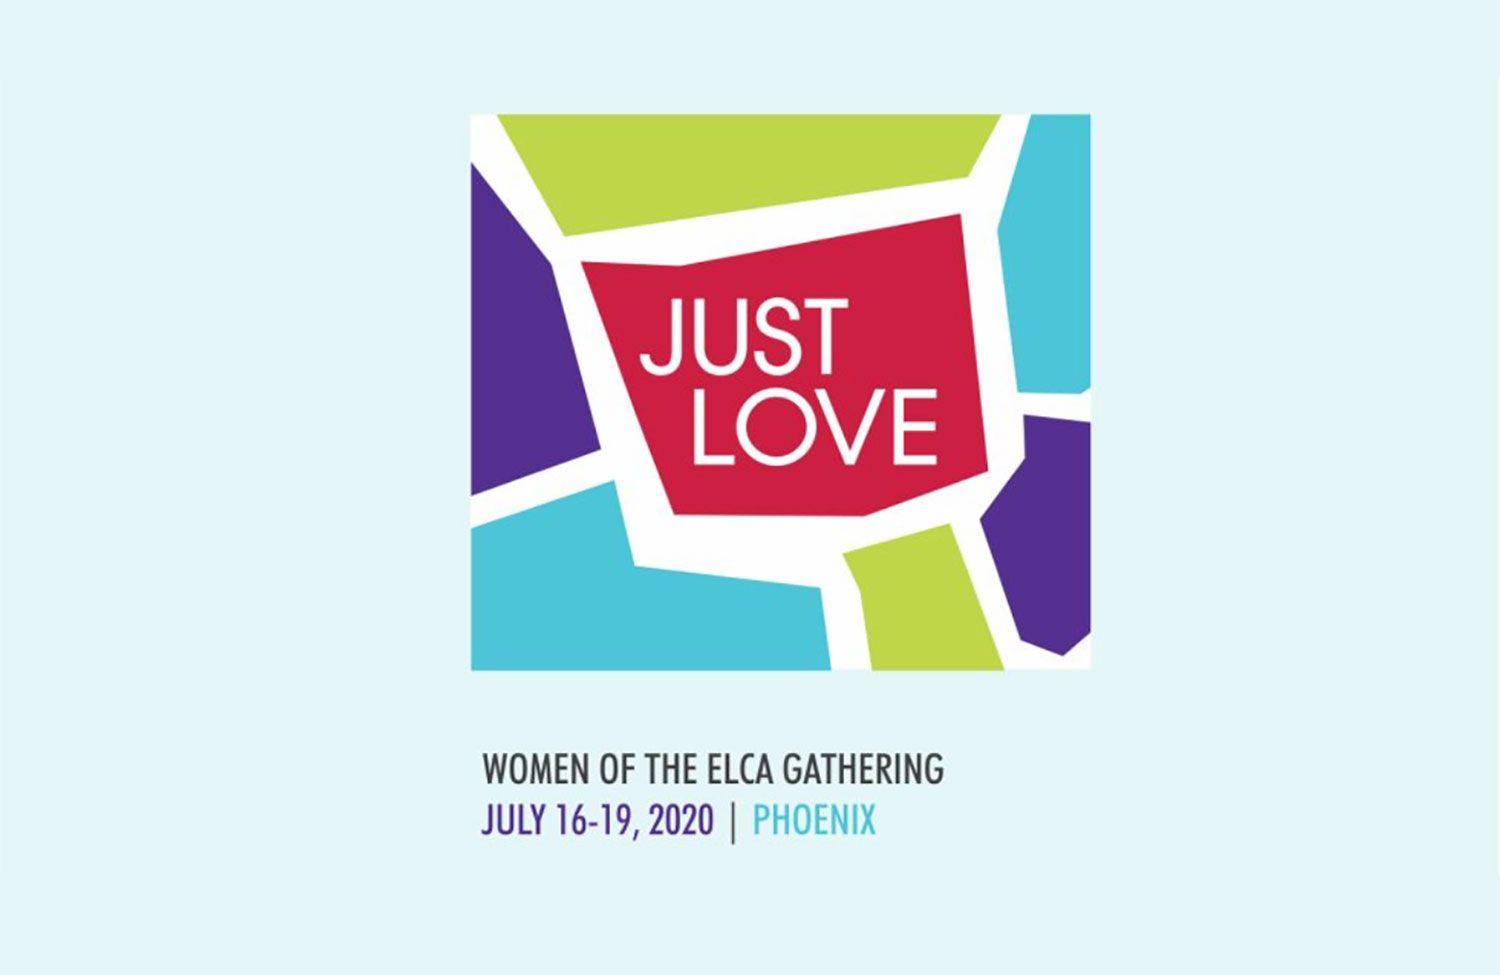 ELCA Logo - Just love” Gathering 2020 logo reminds we are part of one body